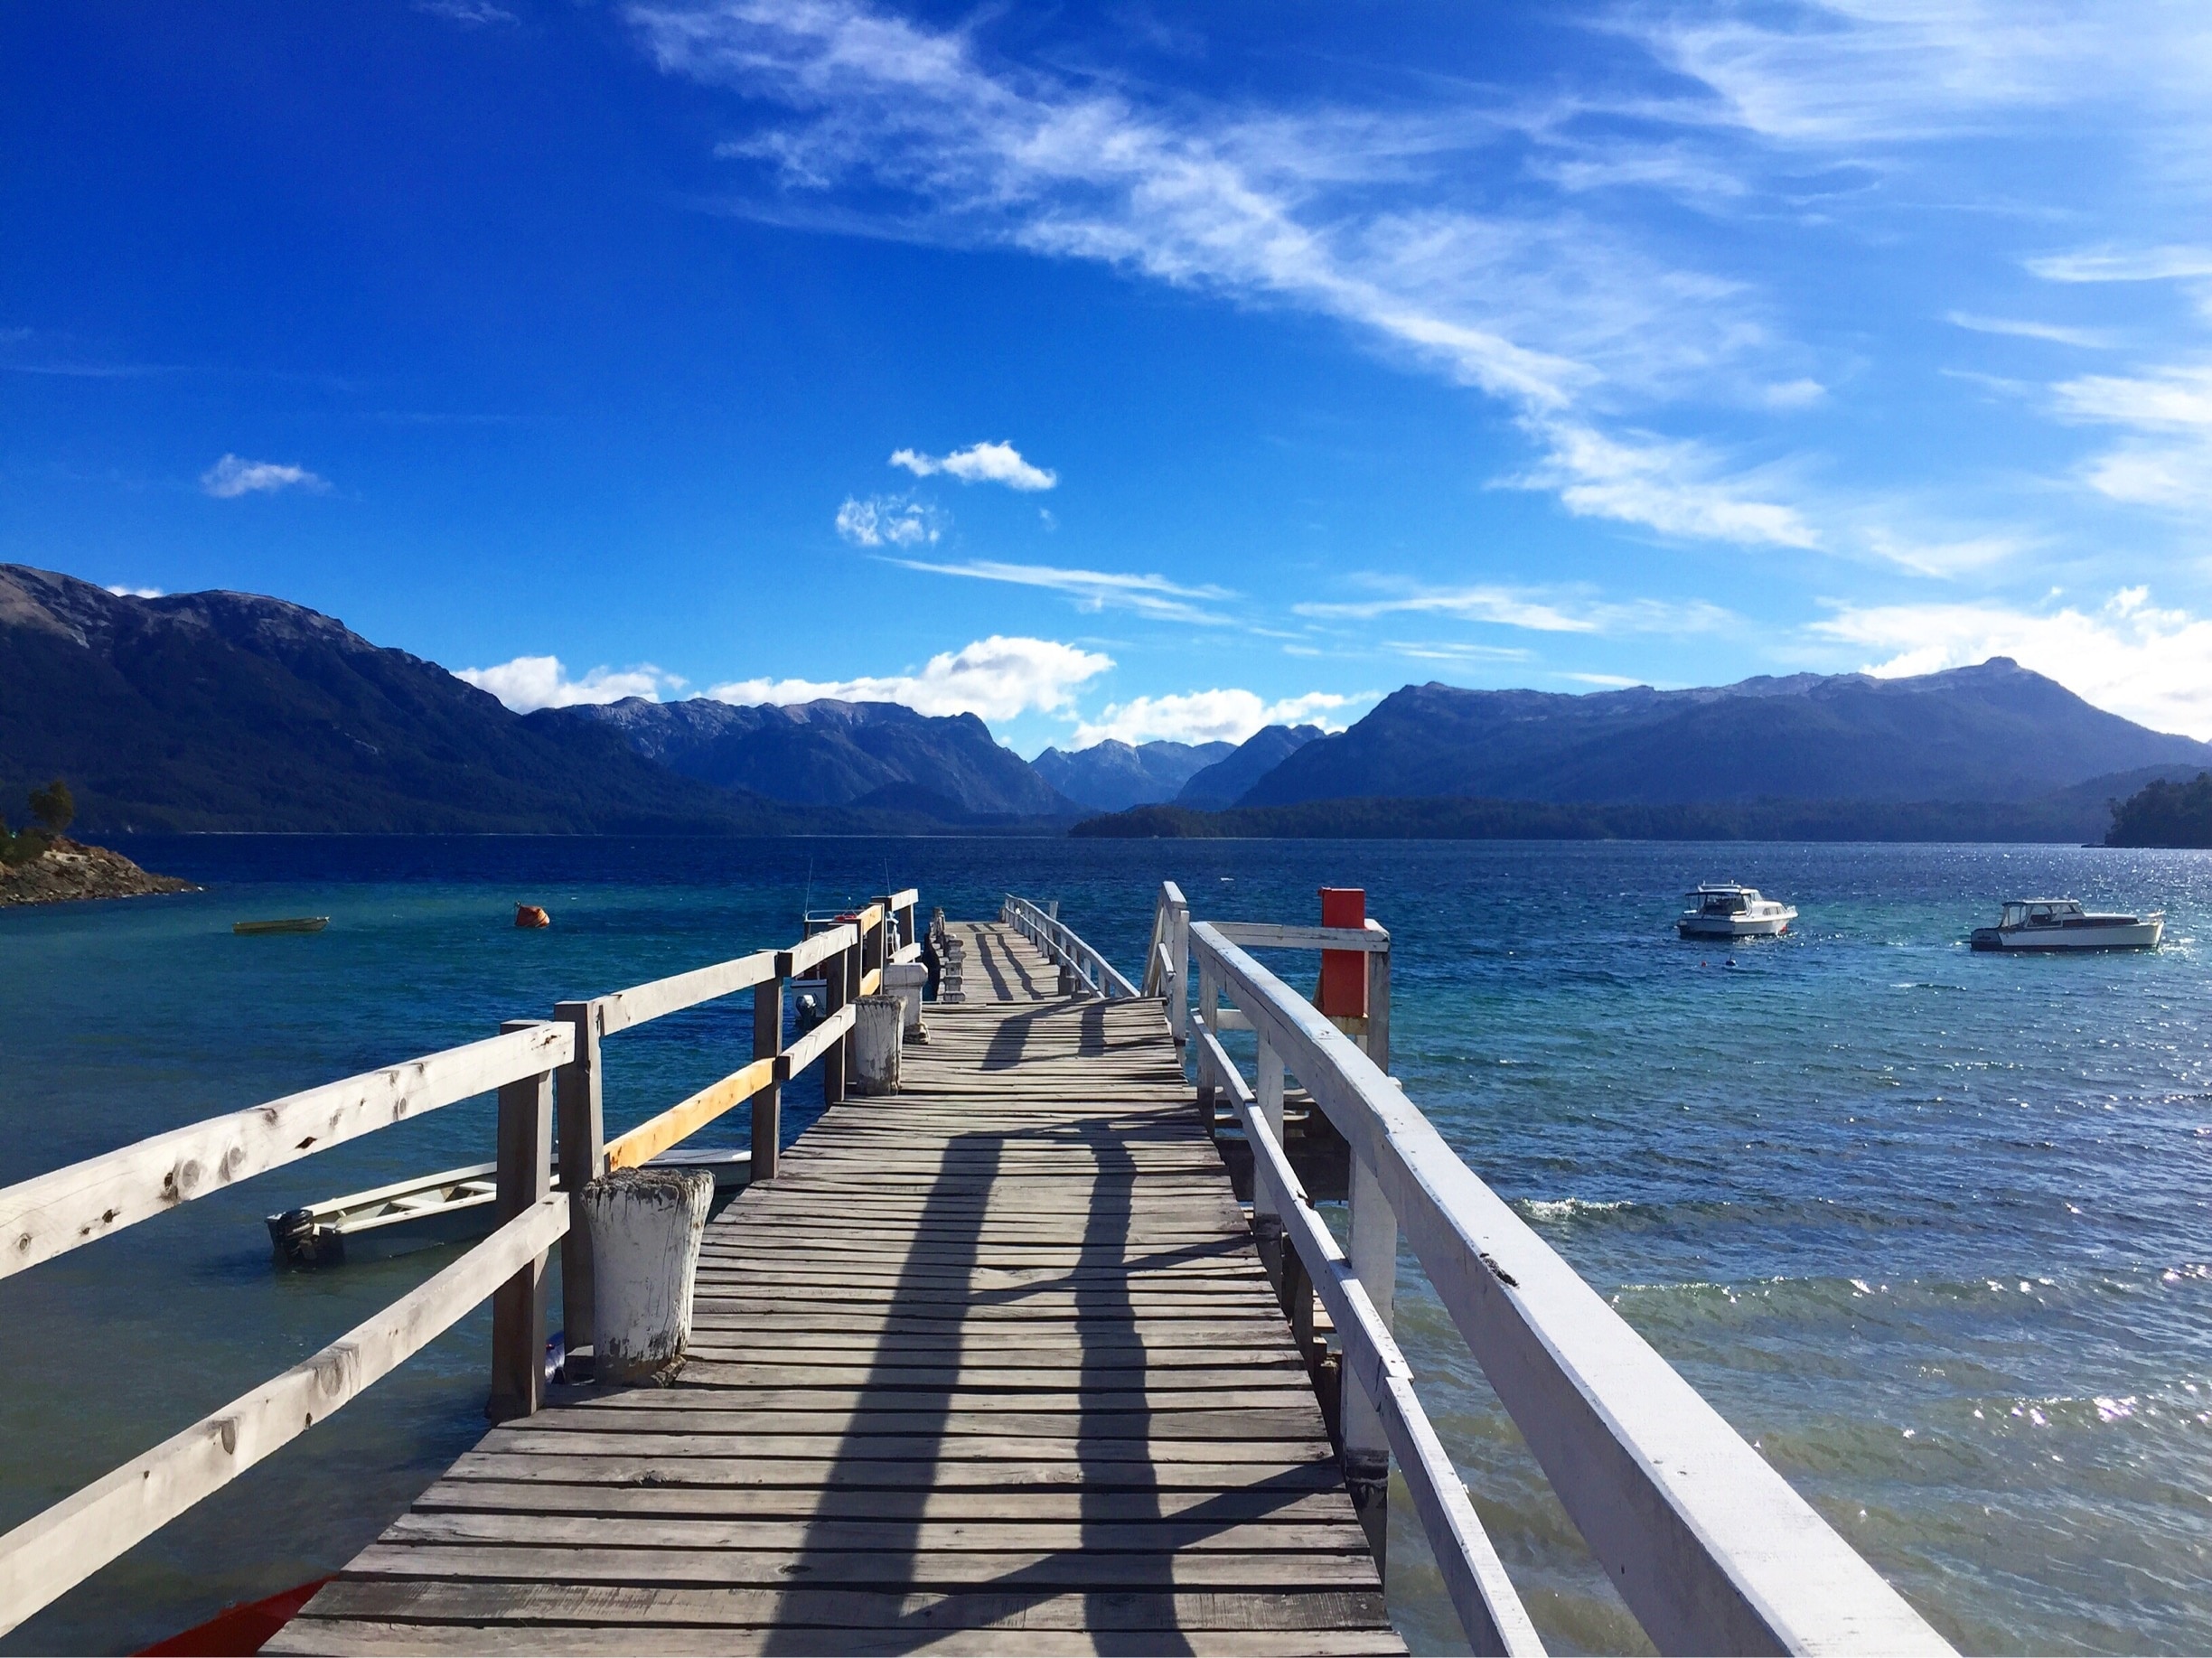 We stayed in Bariloche, Argentina and took a day trip exploring all the surrounding areas. On our trip we came across this beautiful small pier. The Patagonia region of South America is among one of my favorite places on earth #blue #bluetravelphoto